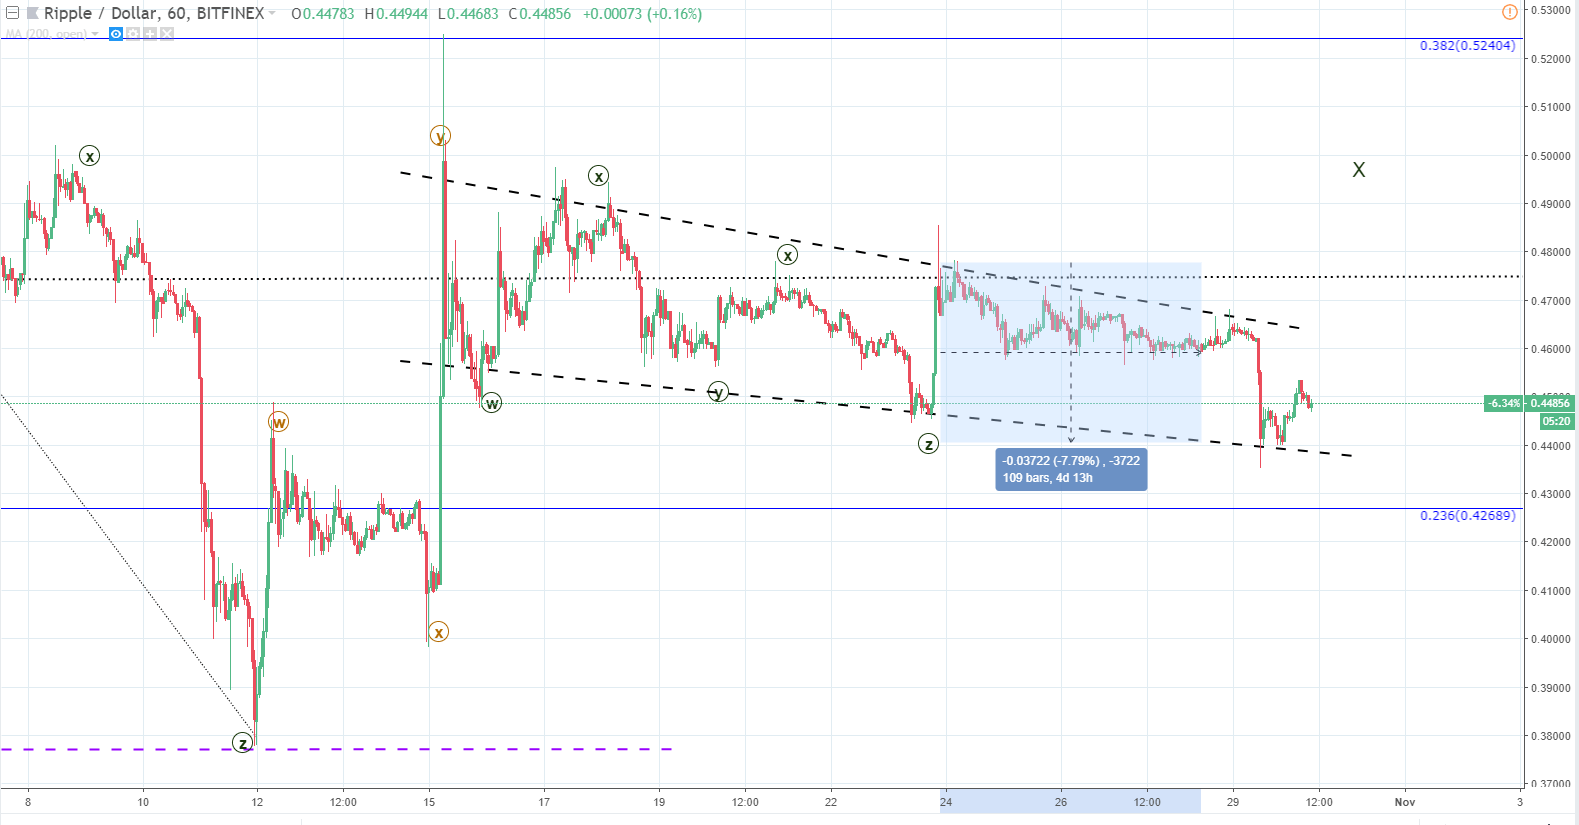 Both BTC/USD and XRP/USD Under Selling Pressure